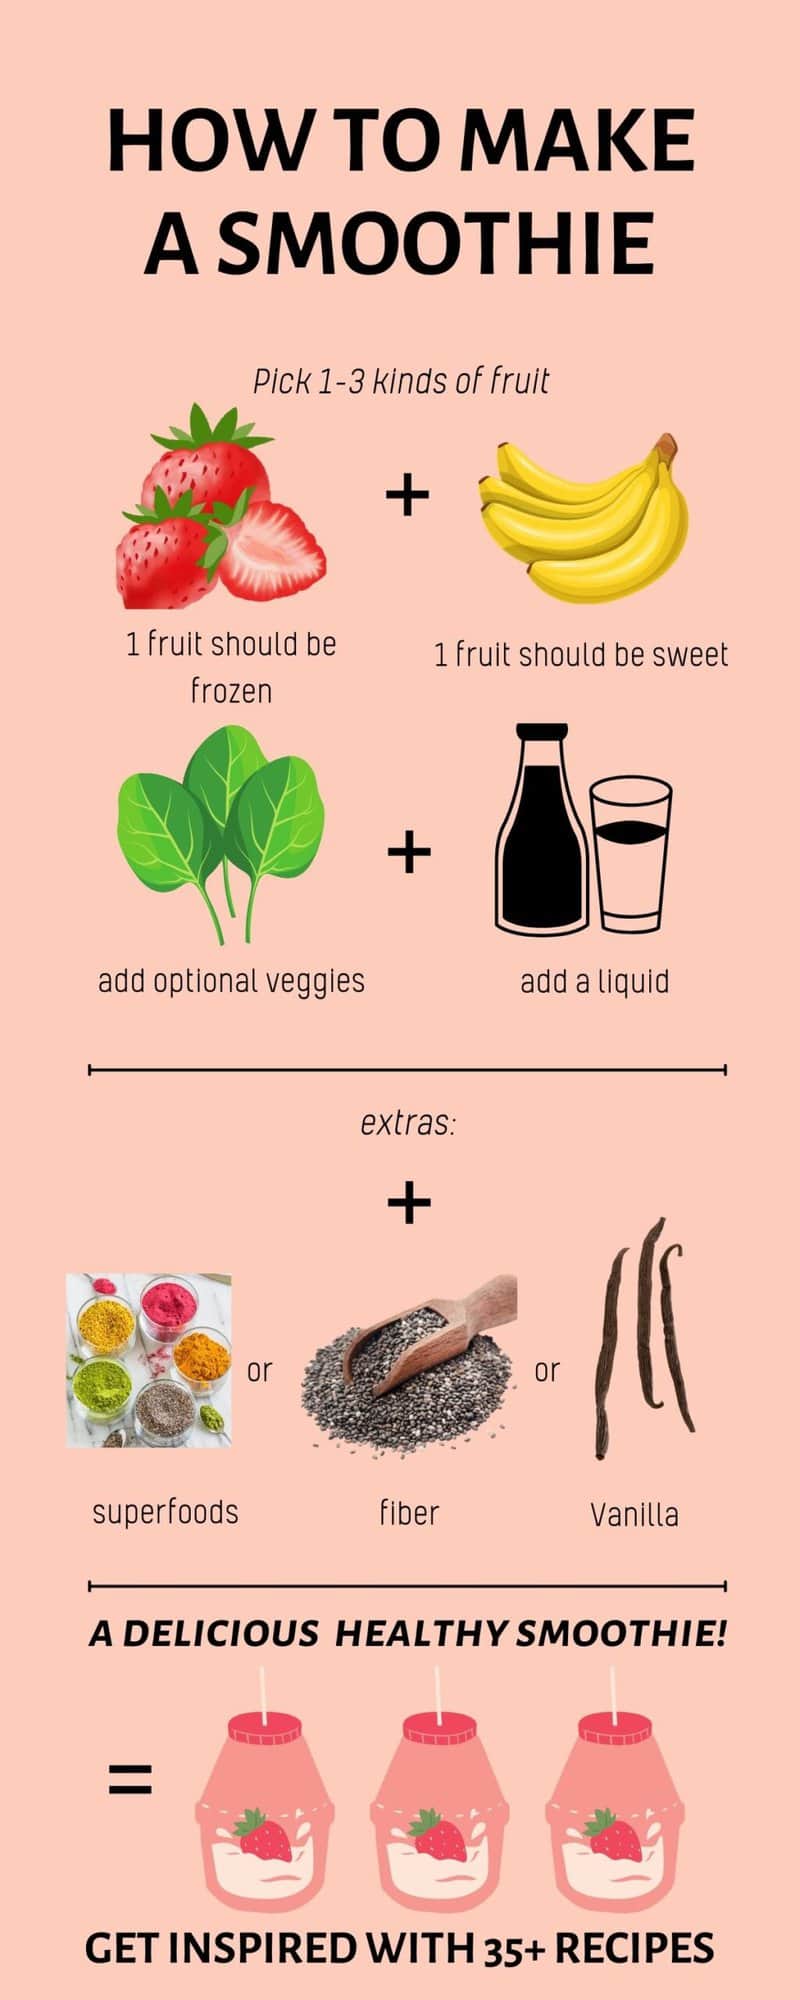 Graphic for How to Make a Smoothie.